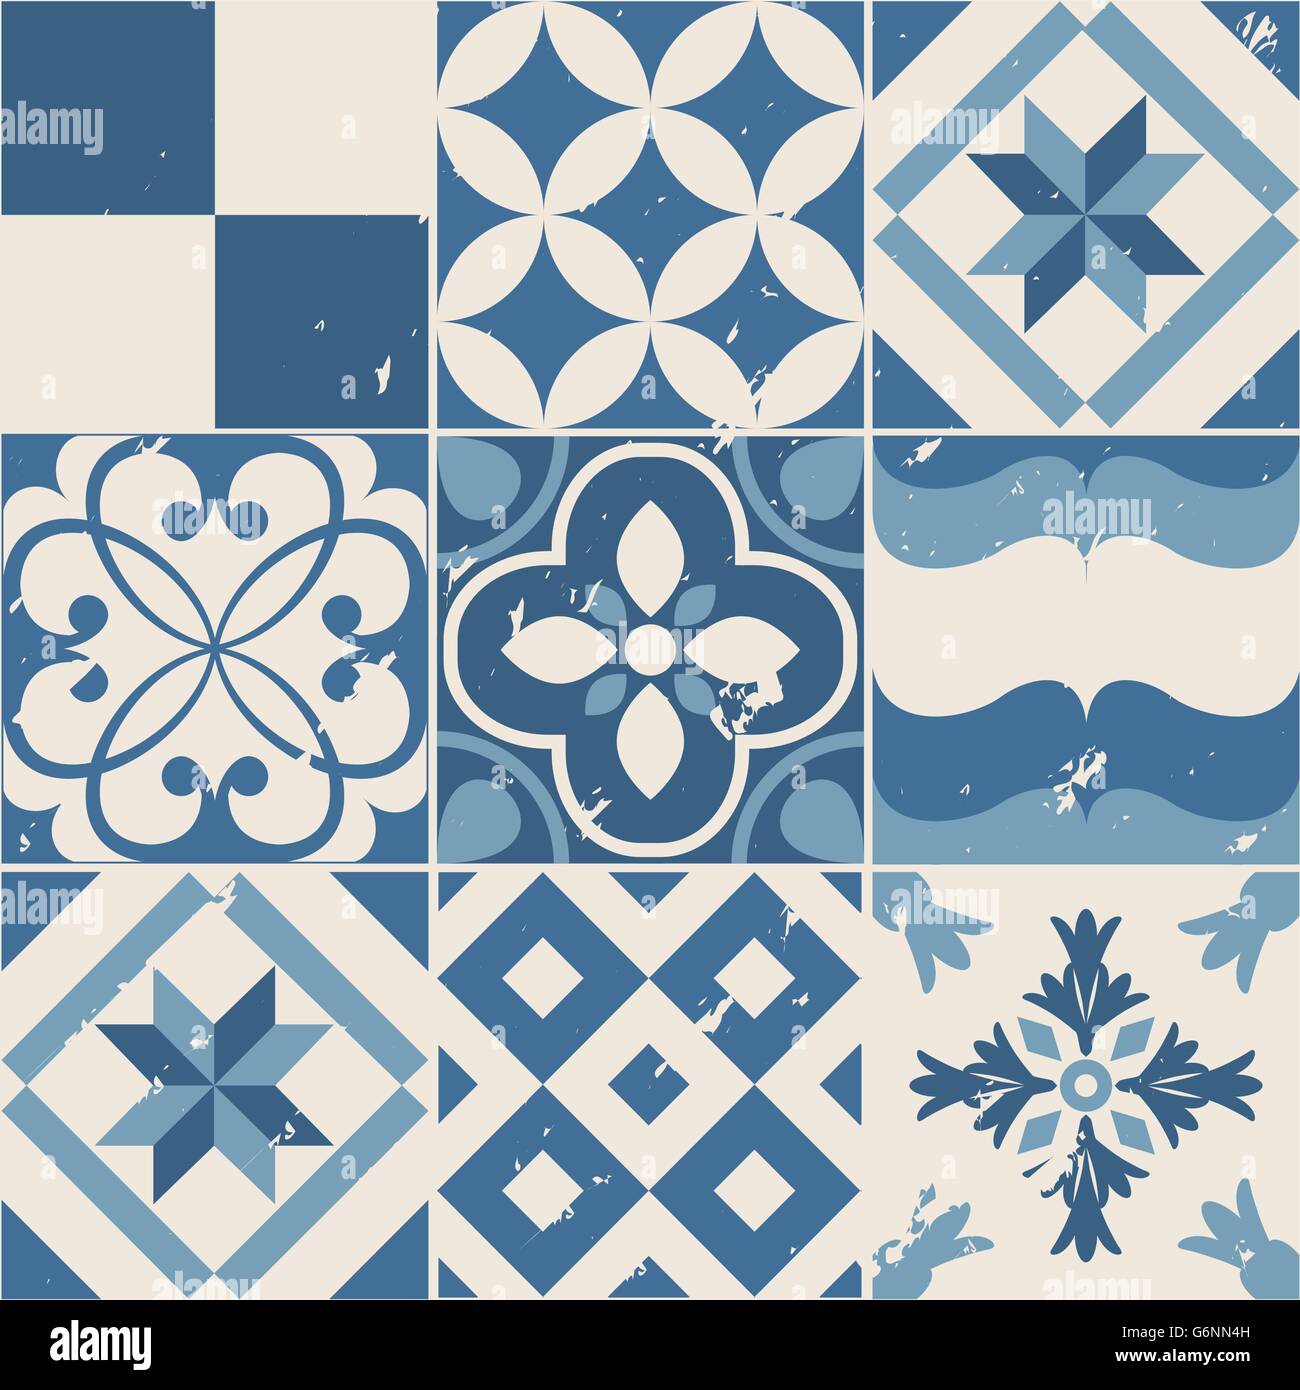 Vintage style cement tile background design Stock Vector